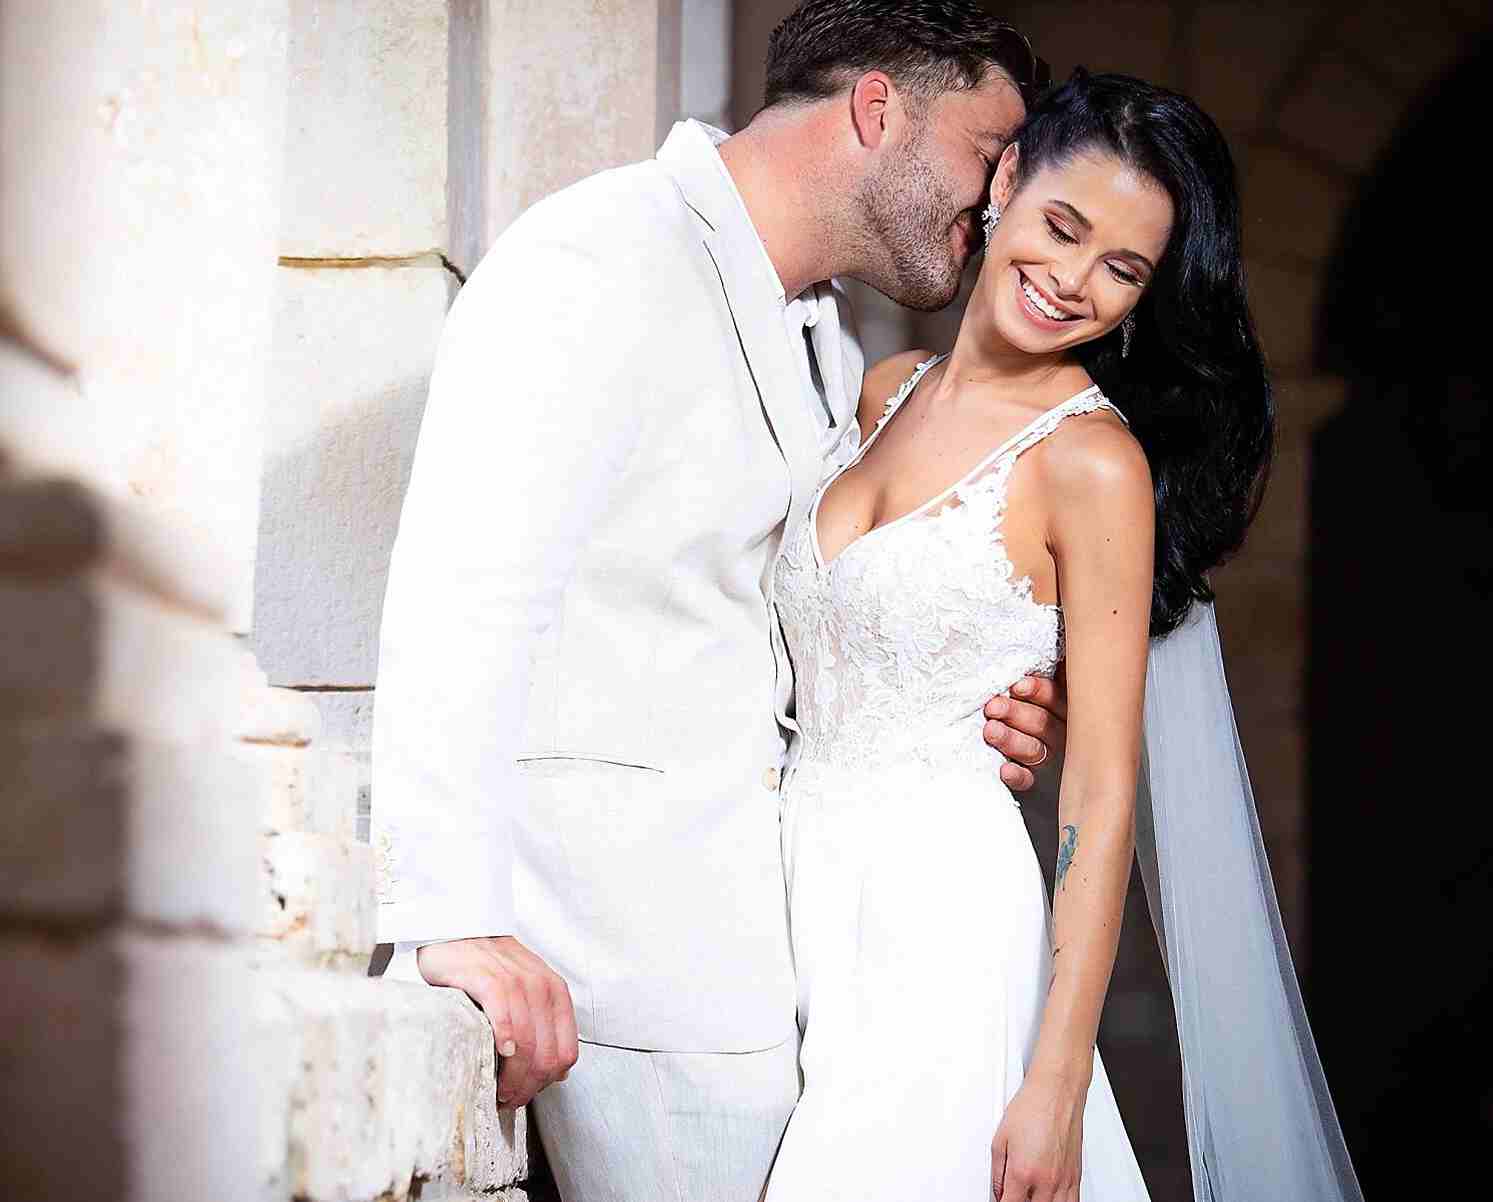 Lilianet Solares in wedding dress with her husband Chris